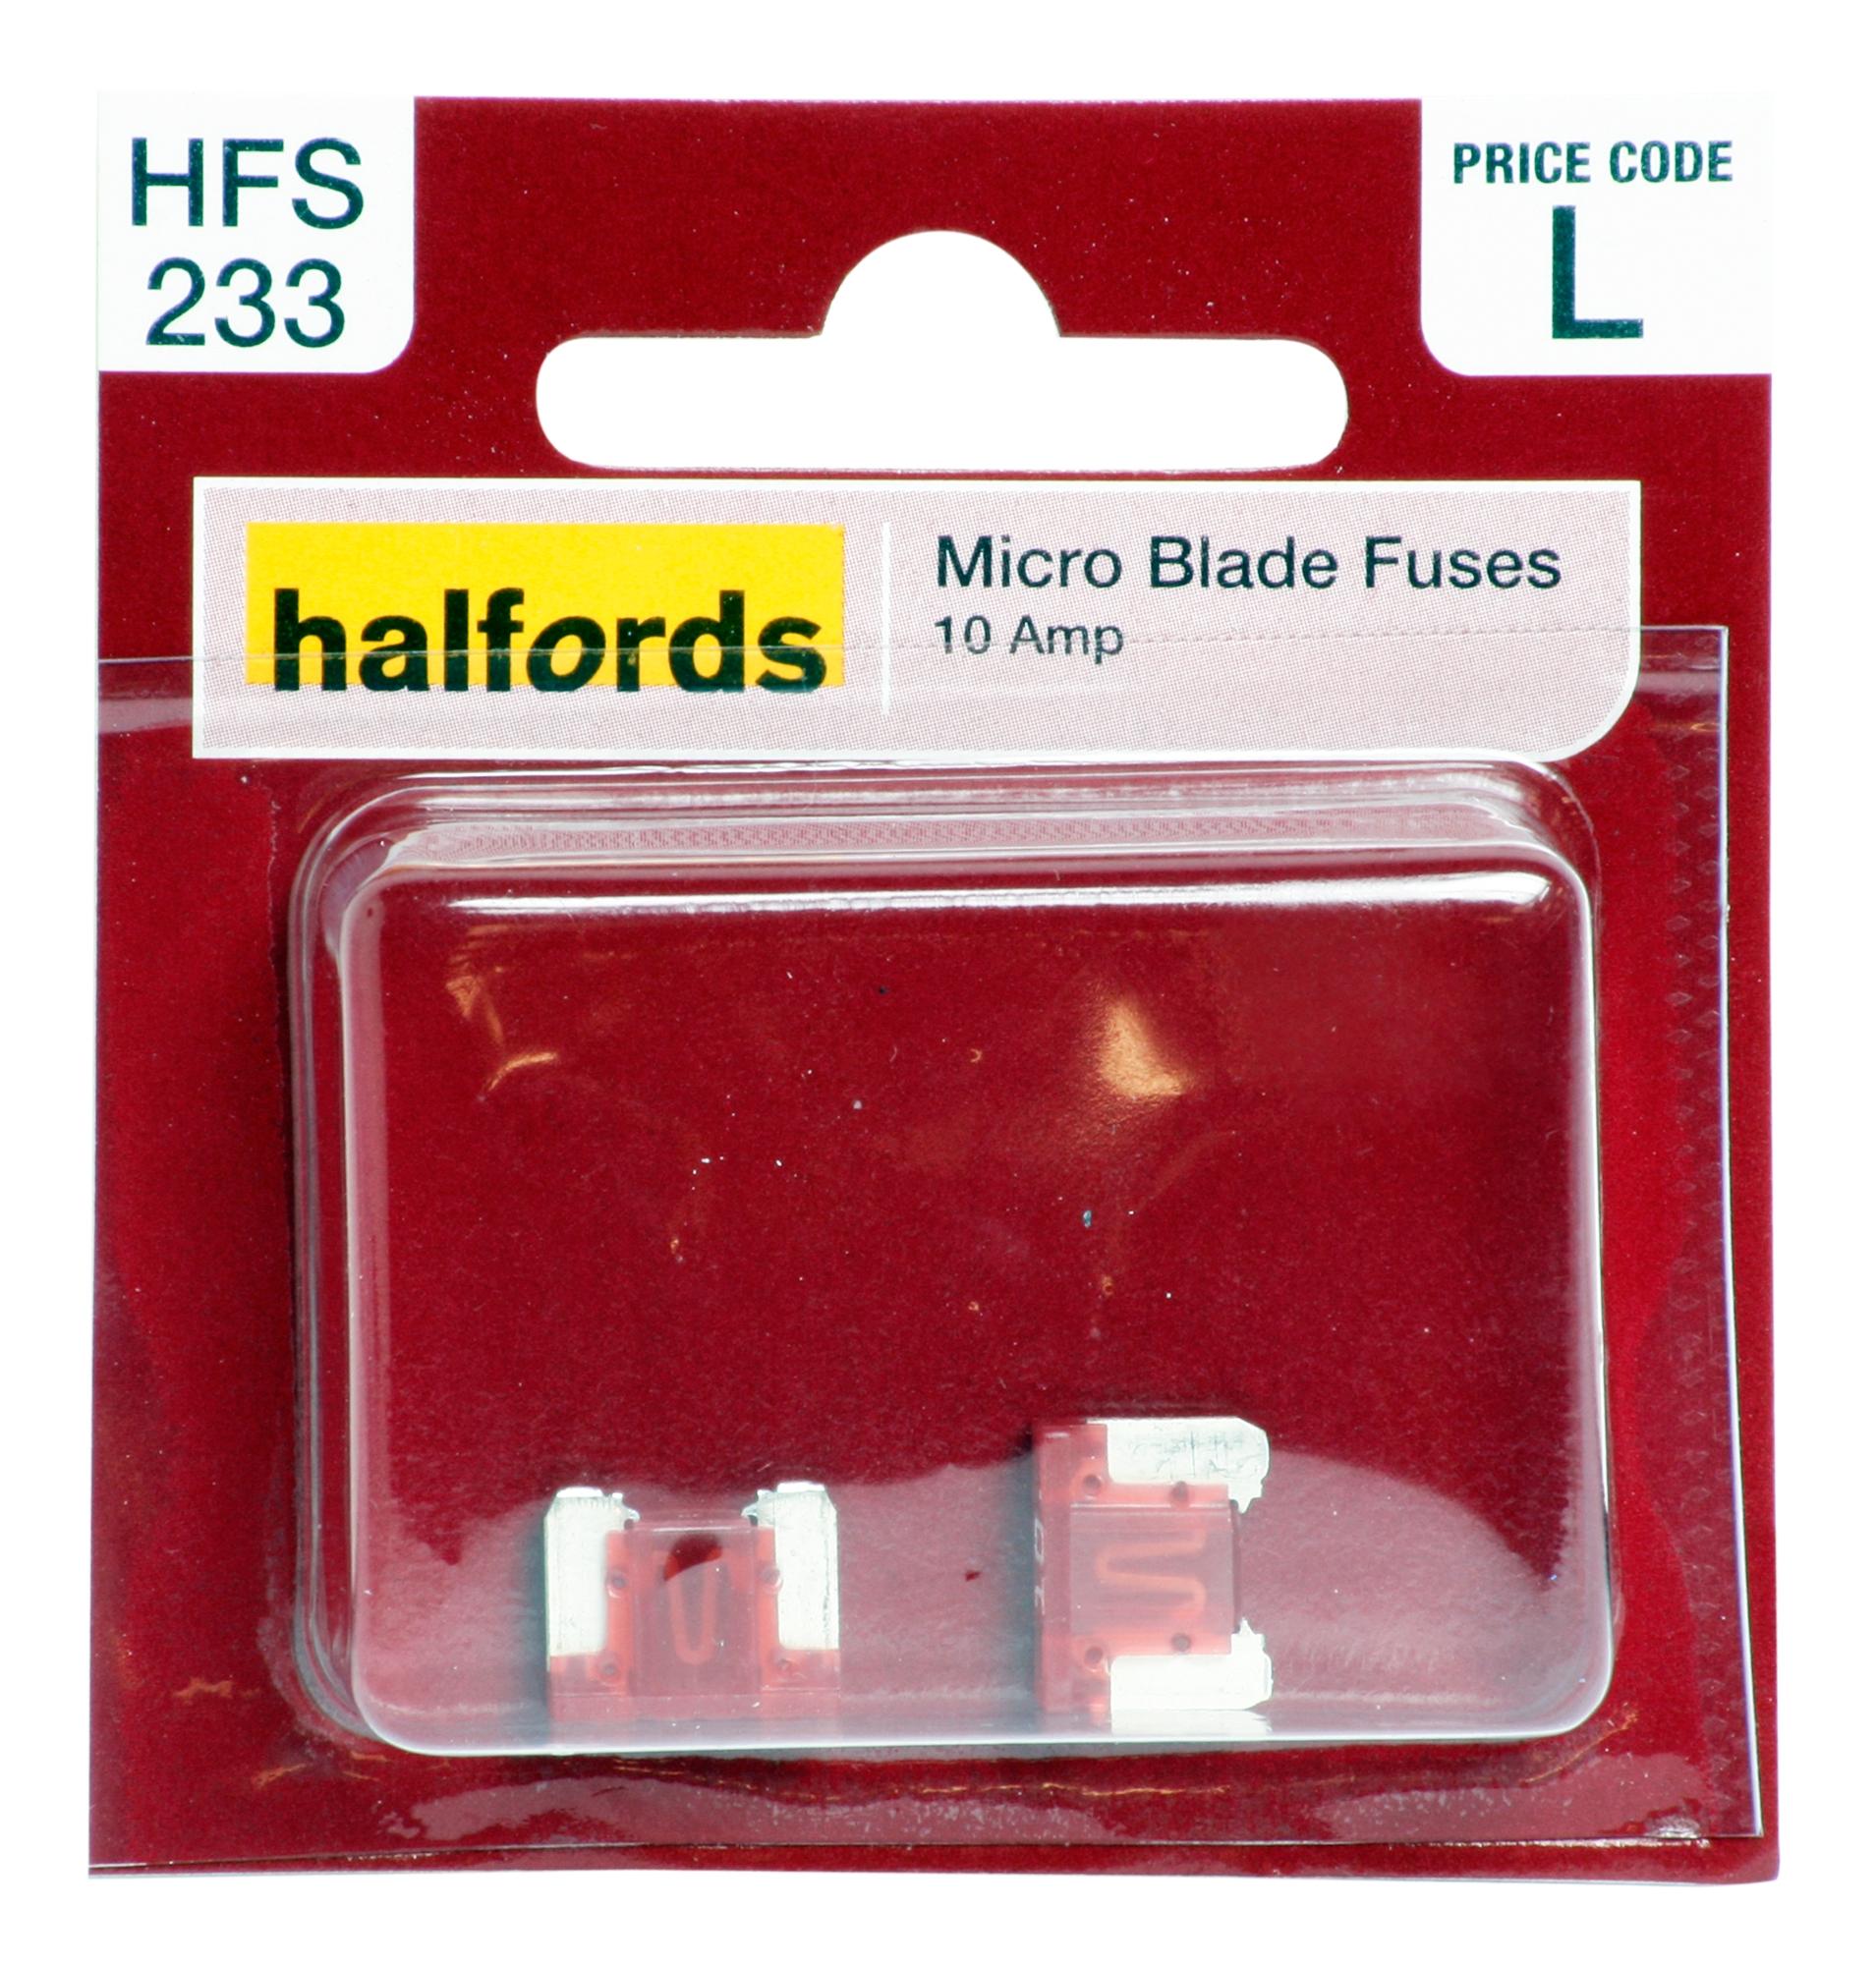 Halfords Micro Blade Fuse 10 Amp (Hfs233)